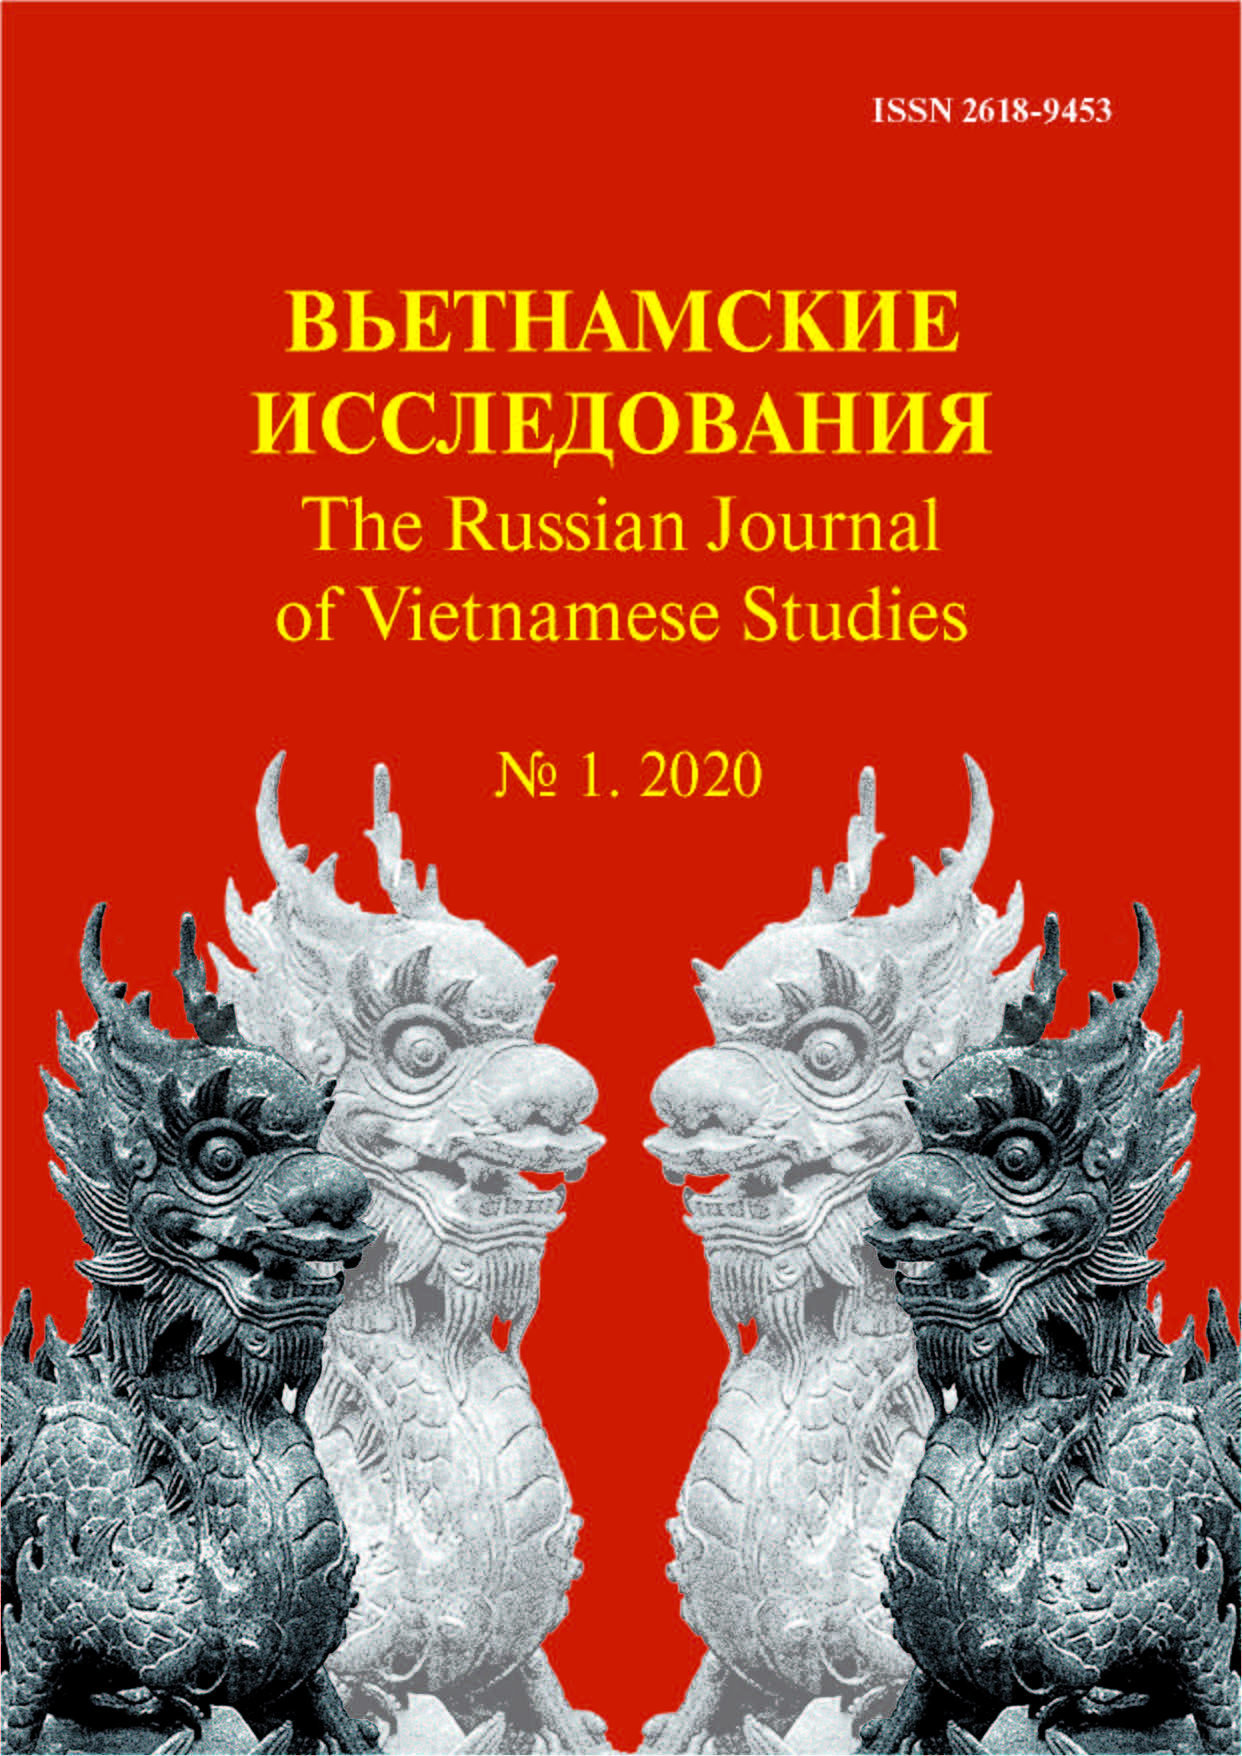 The 1968 Mau Than eventin South Vietnam and the White House political  crisis - Nguyễn - The Russian Journal of Vietnamese Studies